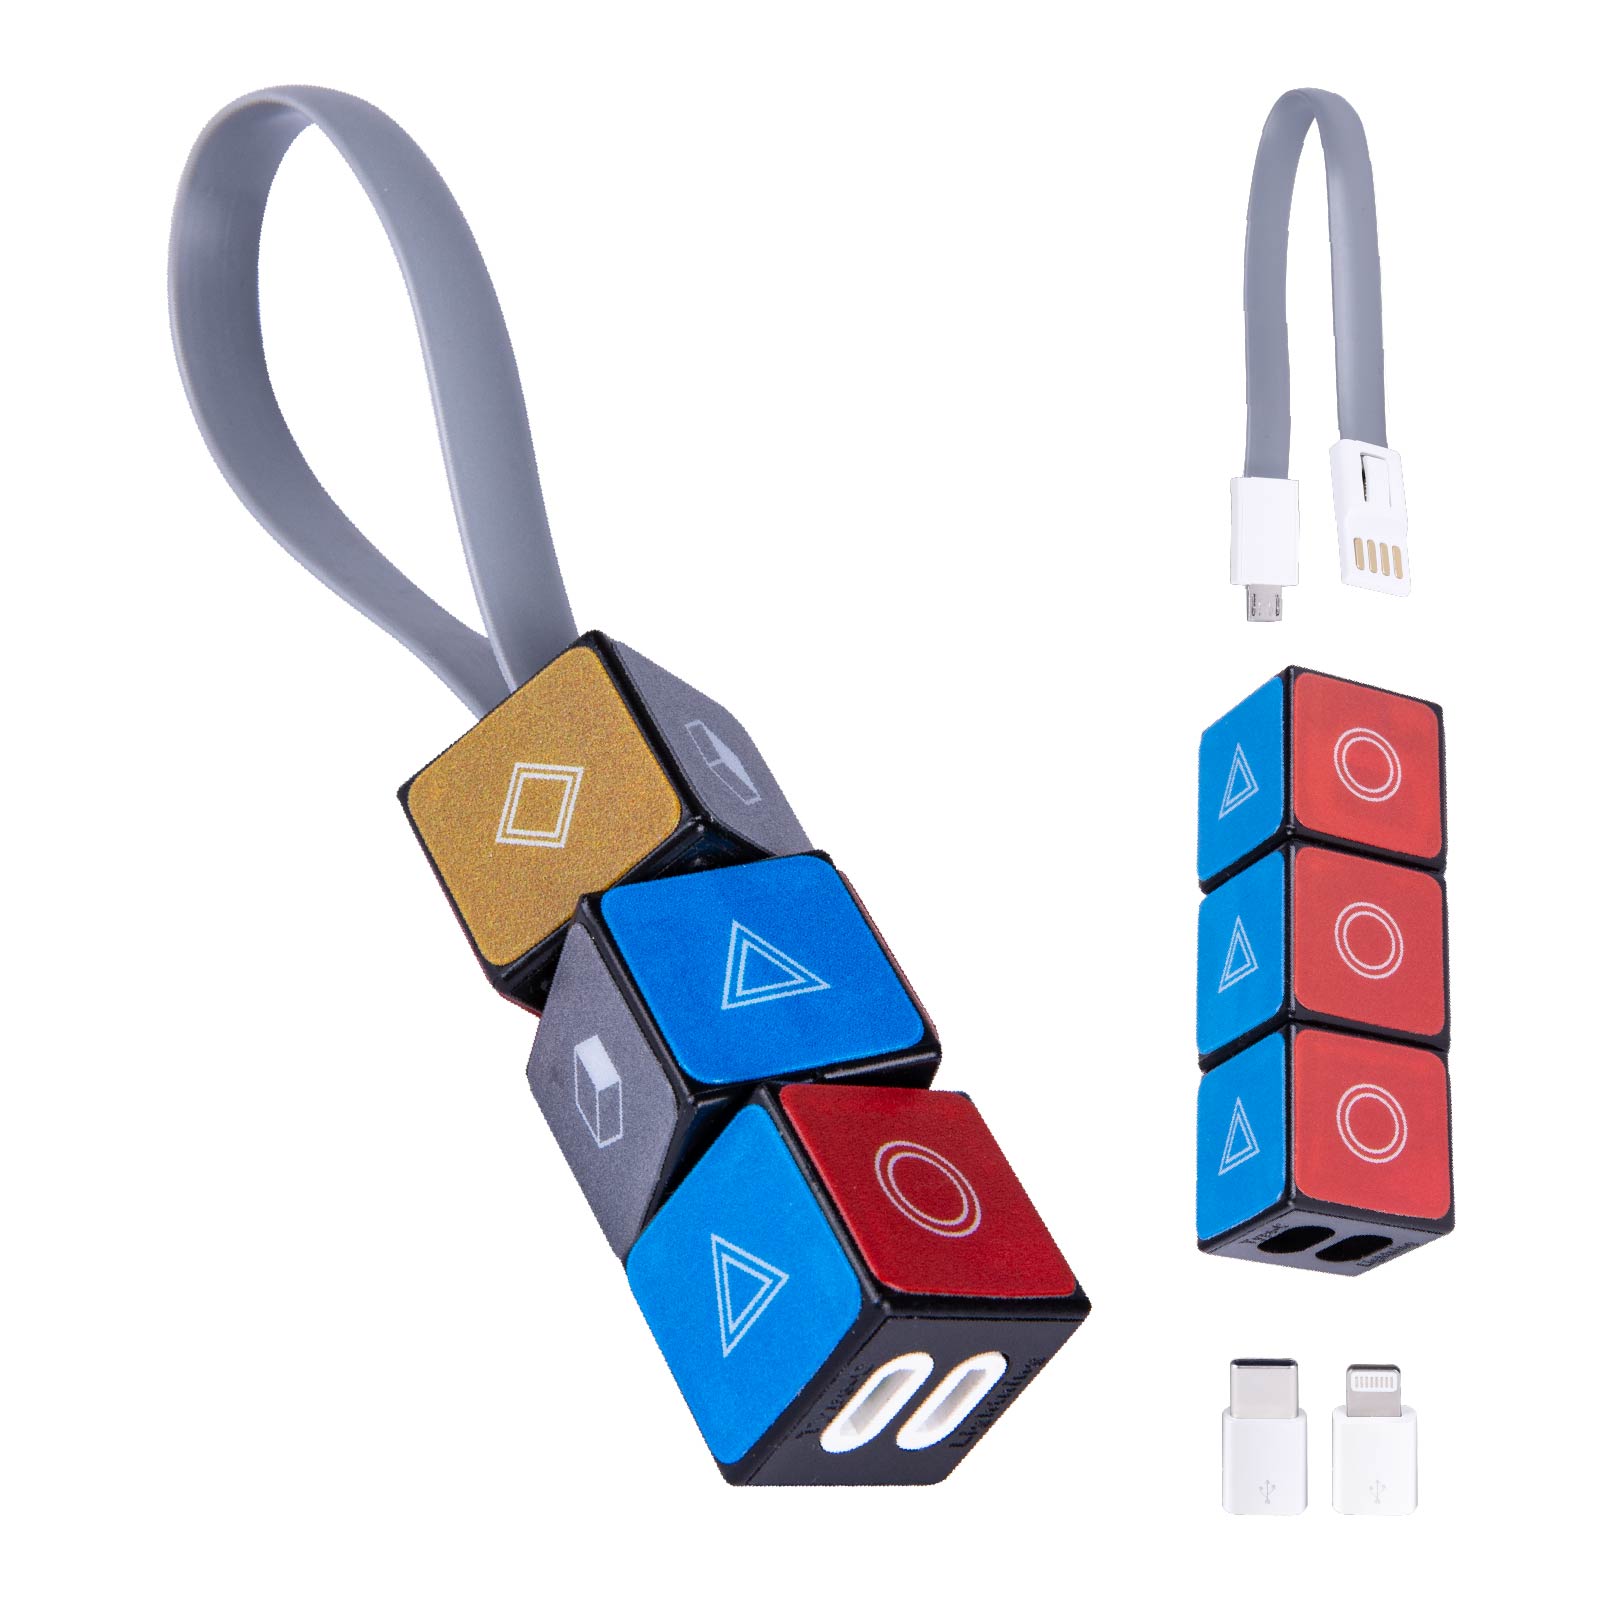 Rubik's Cube Charging Cable Keychains